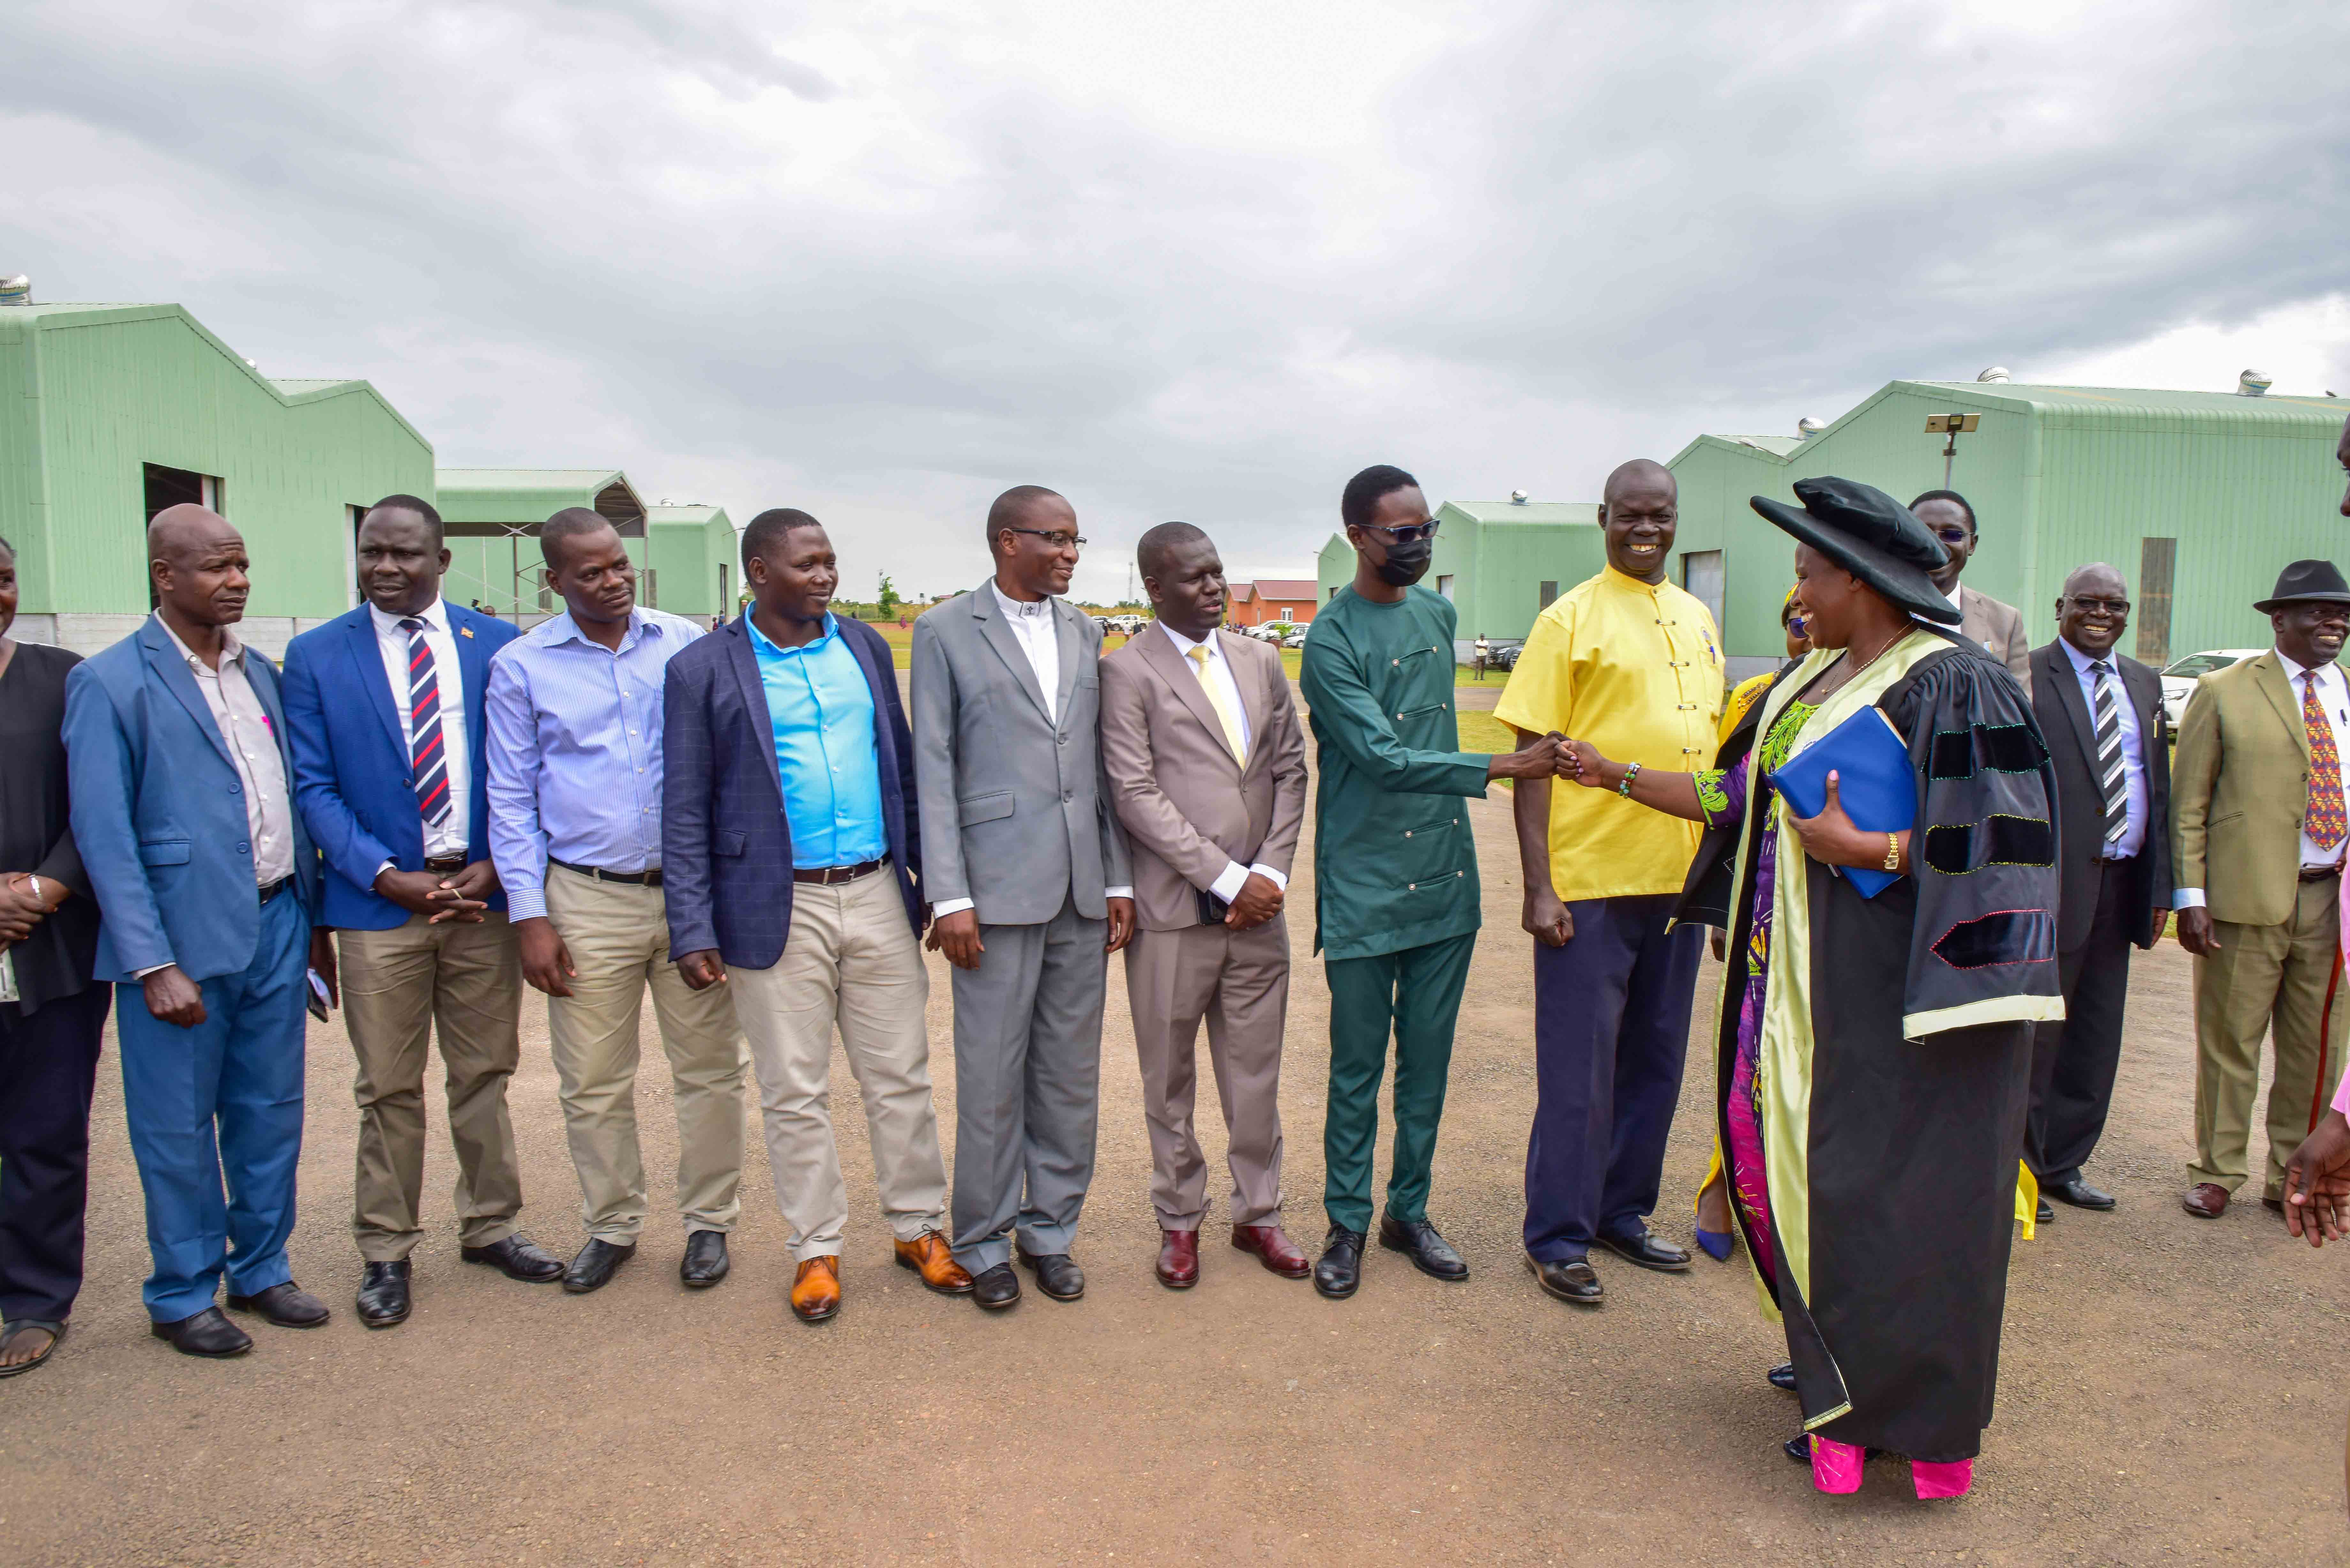 The State House Comptroller Jane Barekye being welcomed as the chief guest for the 1st graduation of the Presidential Initiative for Zonal Industrial Parks for Skills Development, Value Addition and Wealth creation at the Lango Zonal Industrial Hub in Lira district on 3rd January 2023.